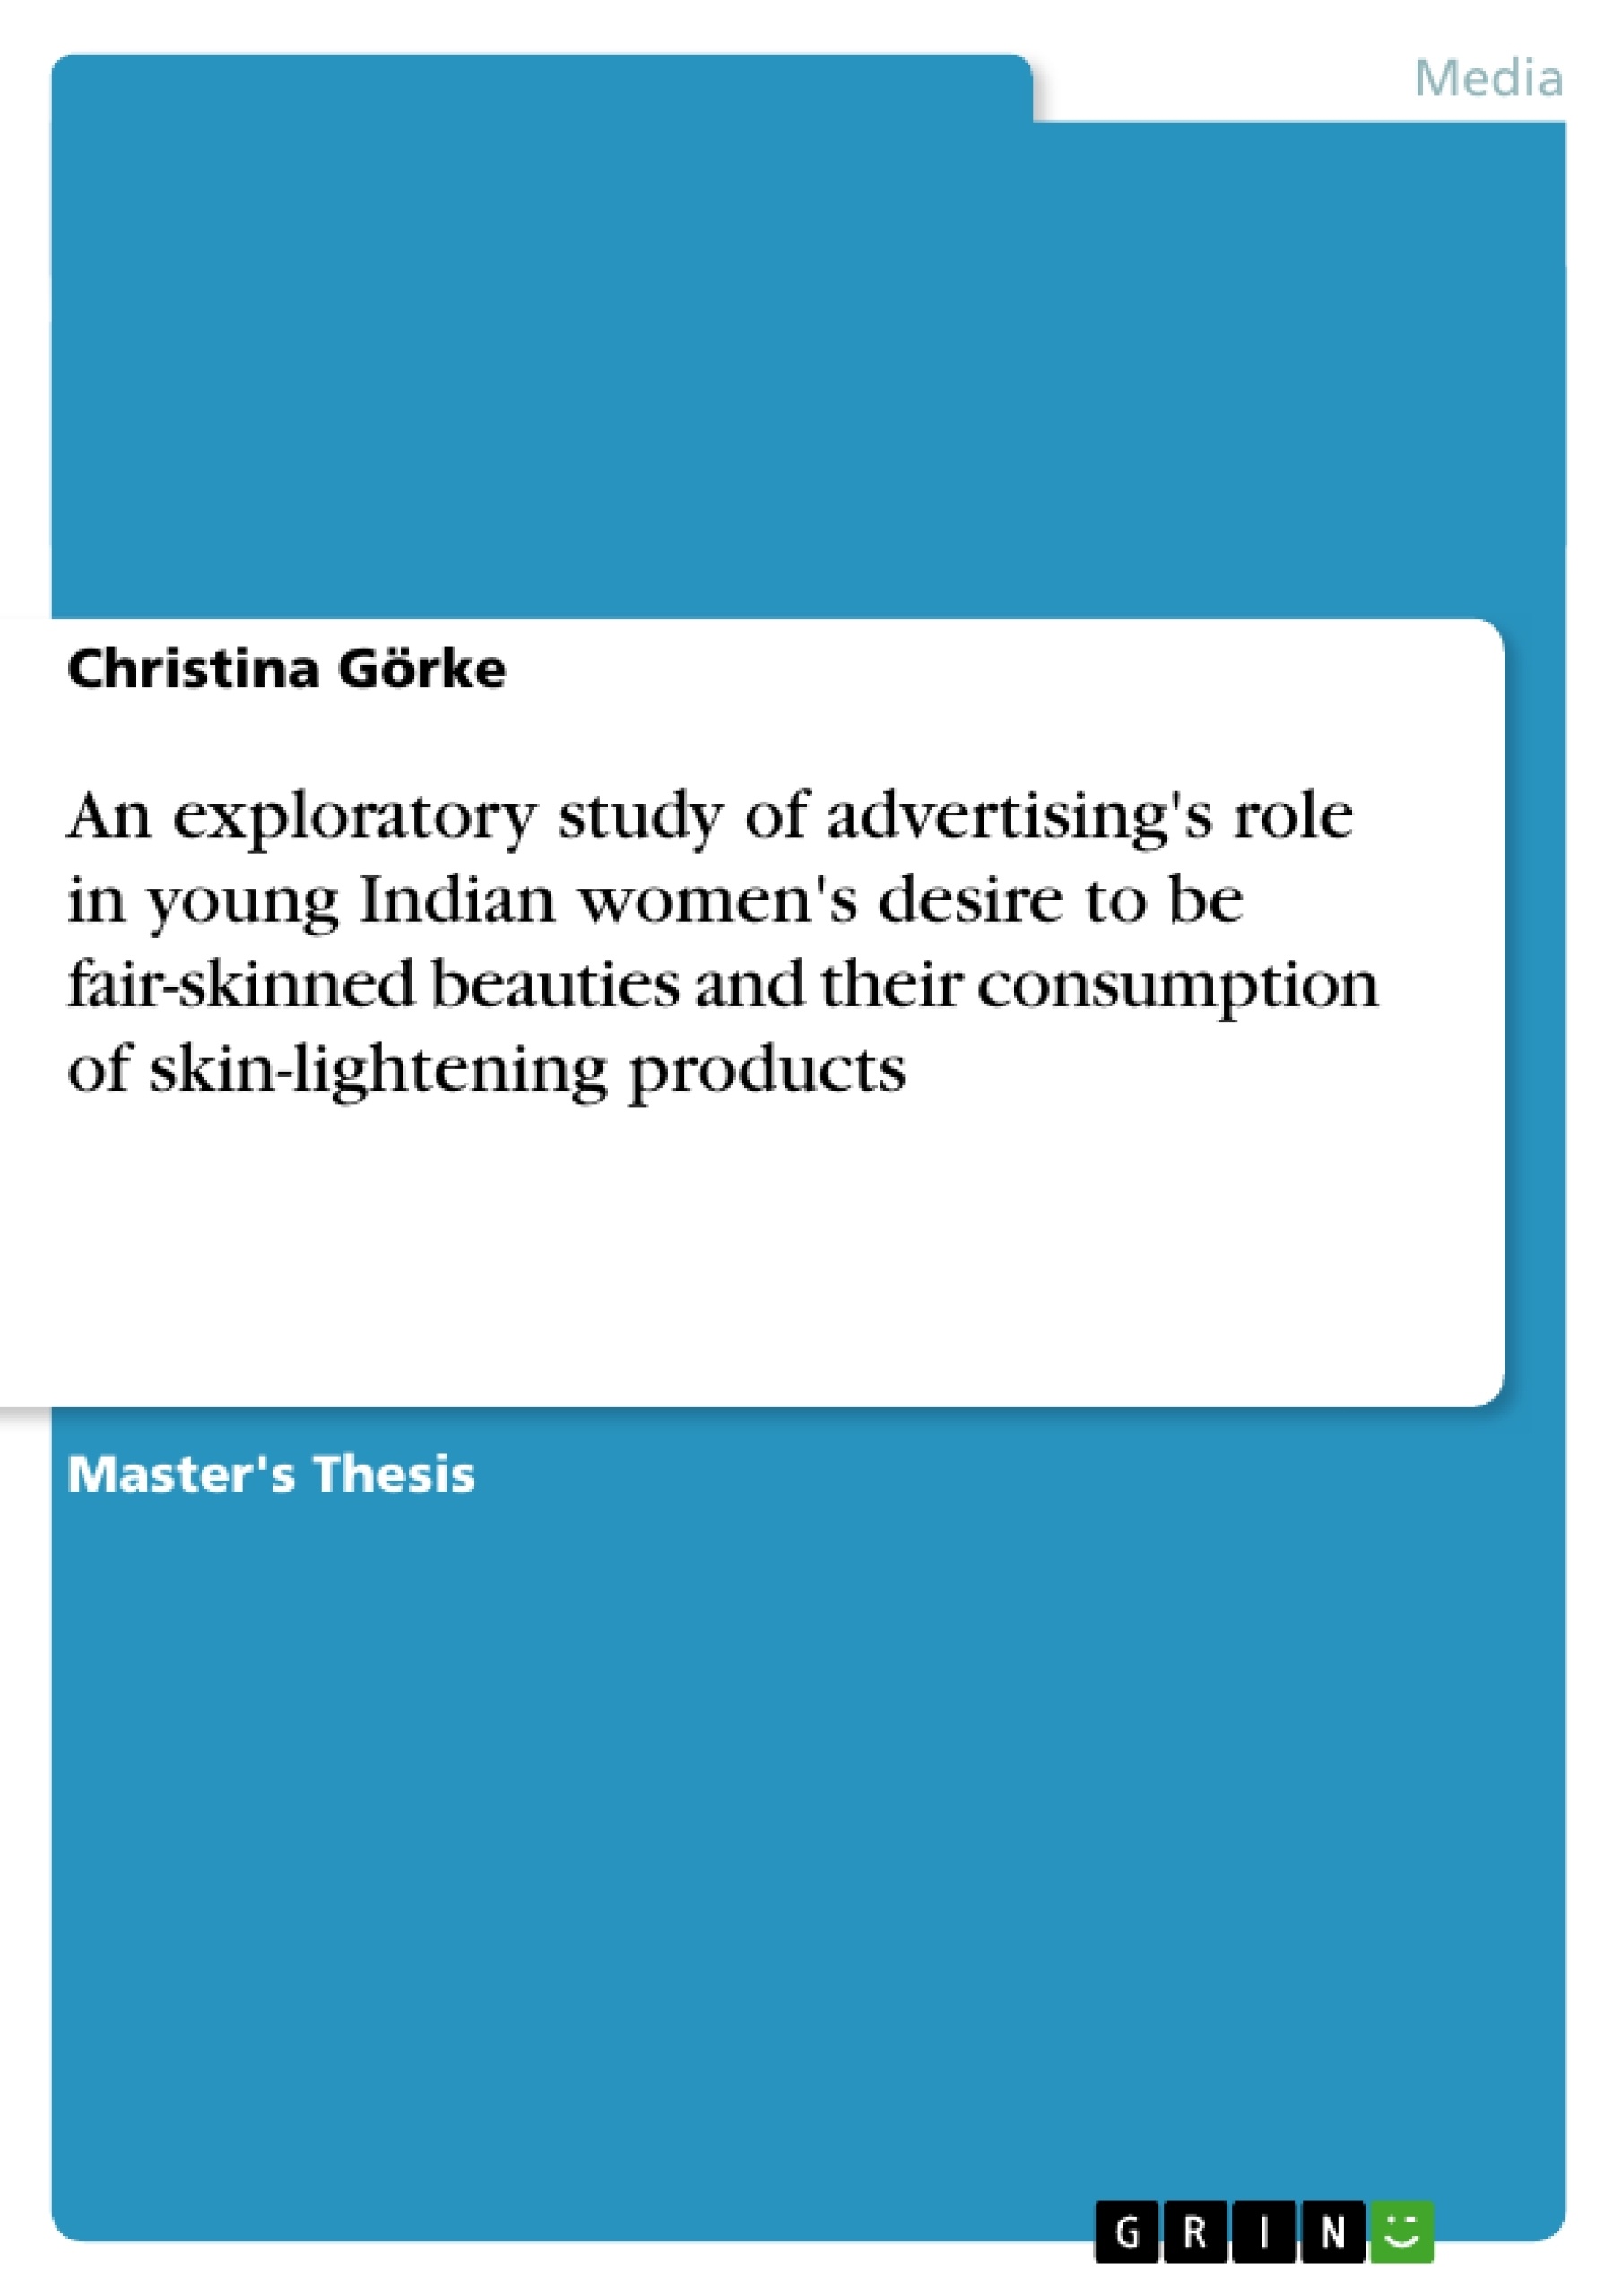 Título: An exploratory study of advertising's role in young Indian women's desire to be fair-skinned beauties and their consumption of skin-lightening products